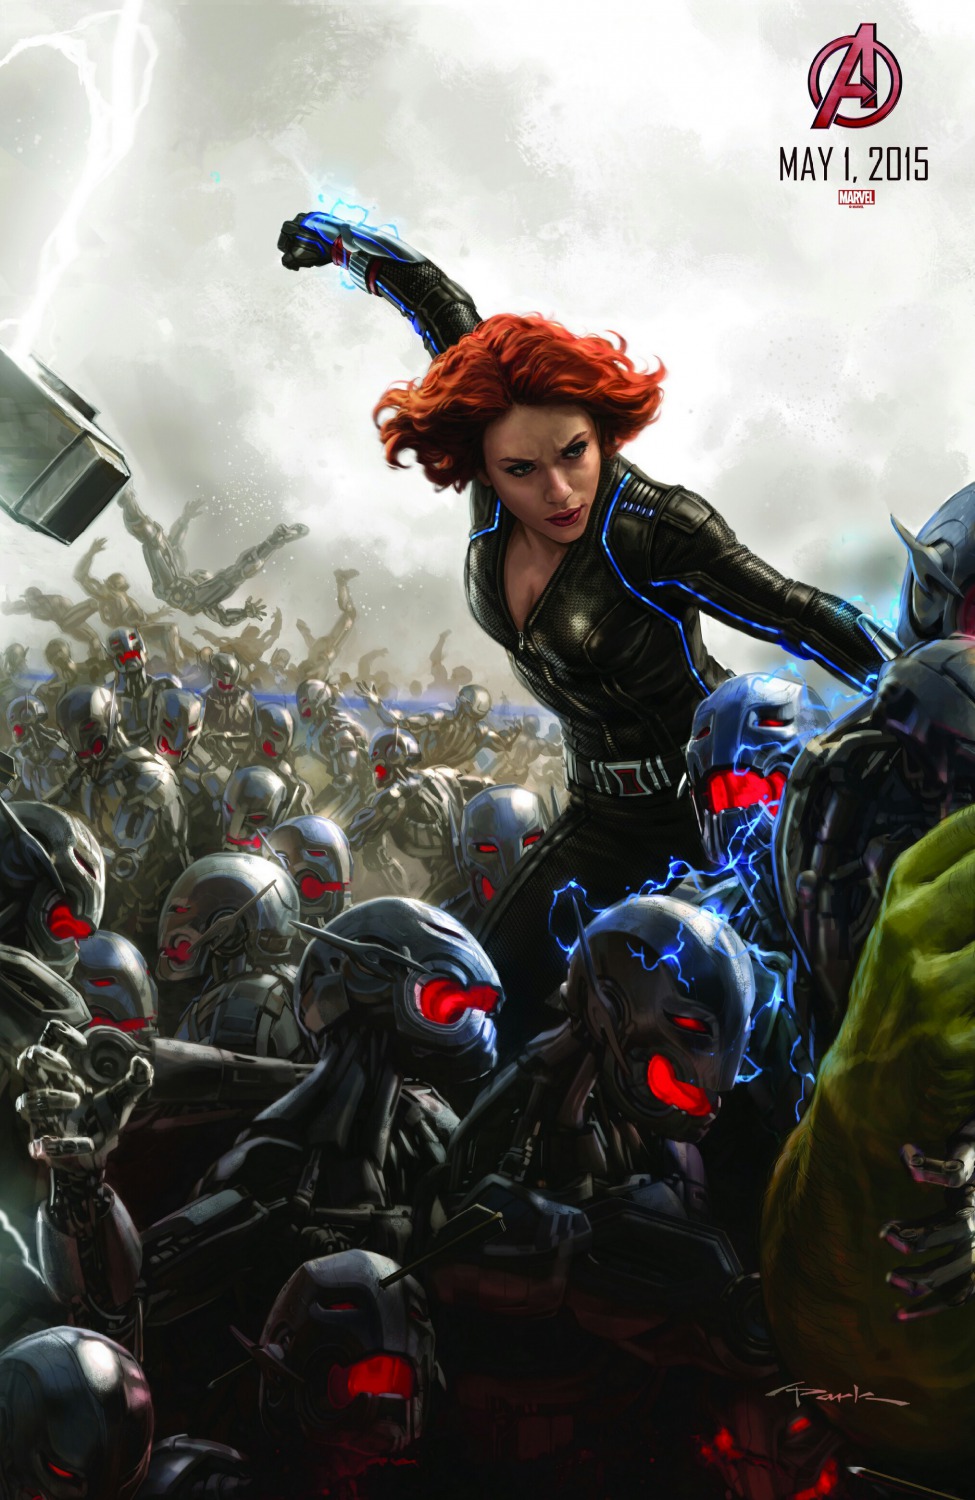 Extra Large Movie Poster Image for Avengers: Age of Ultron (#4 of 36)